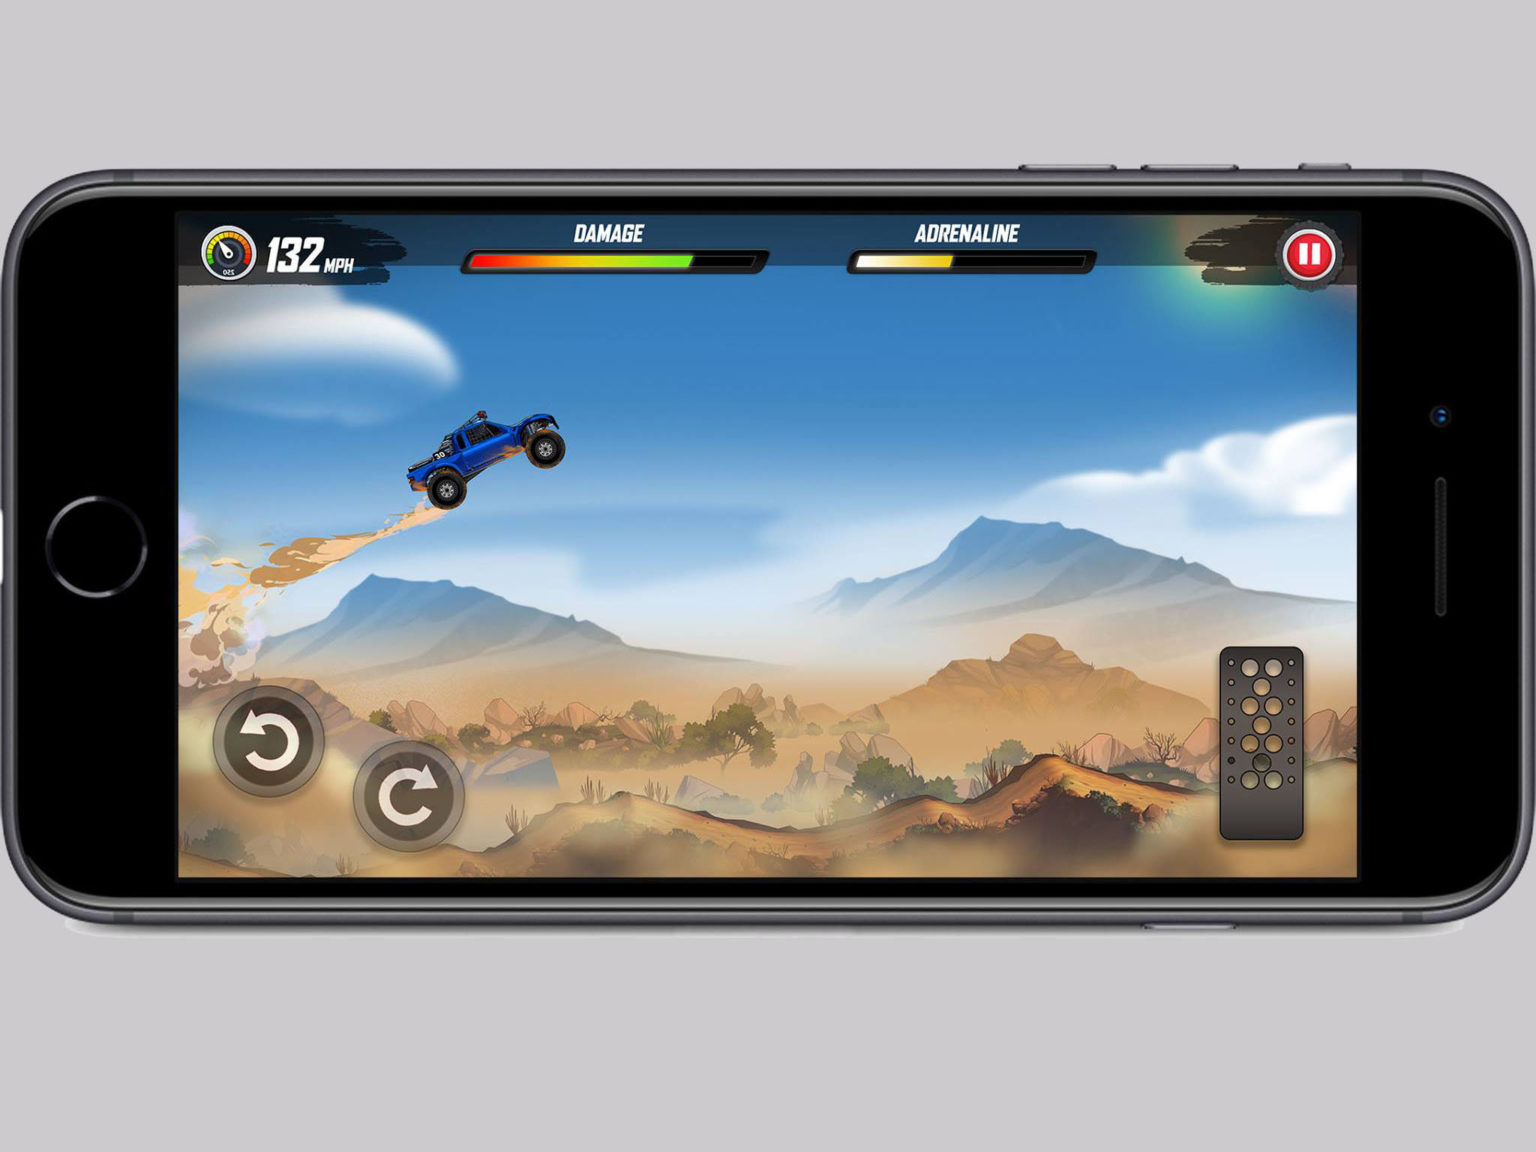 The new game allows users to race in a virtual Baja 1000.